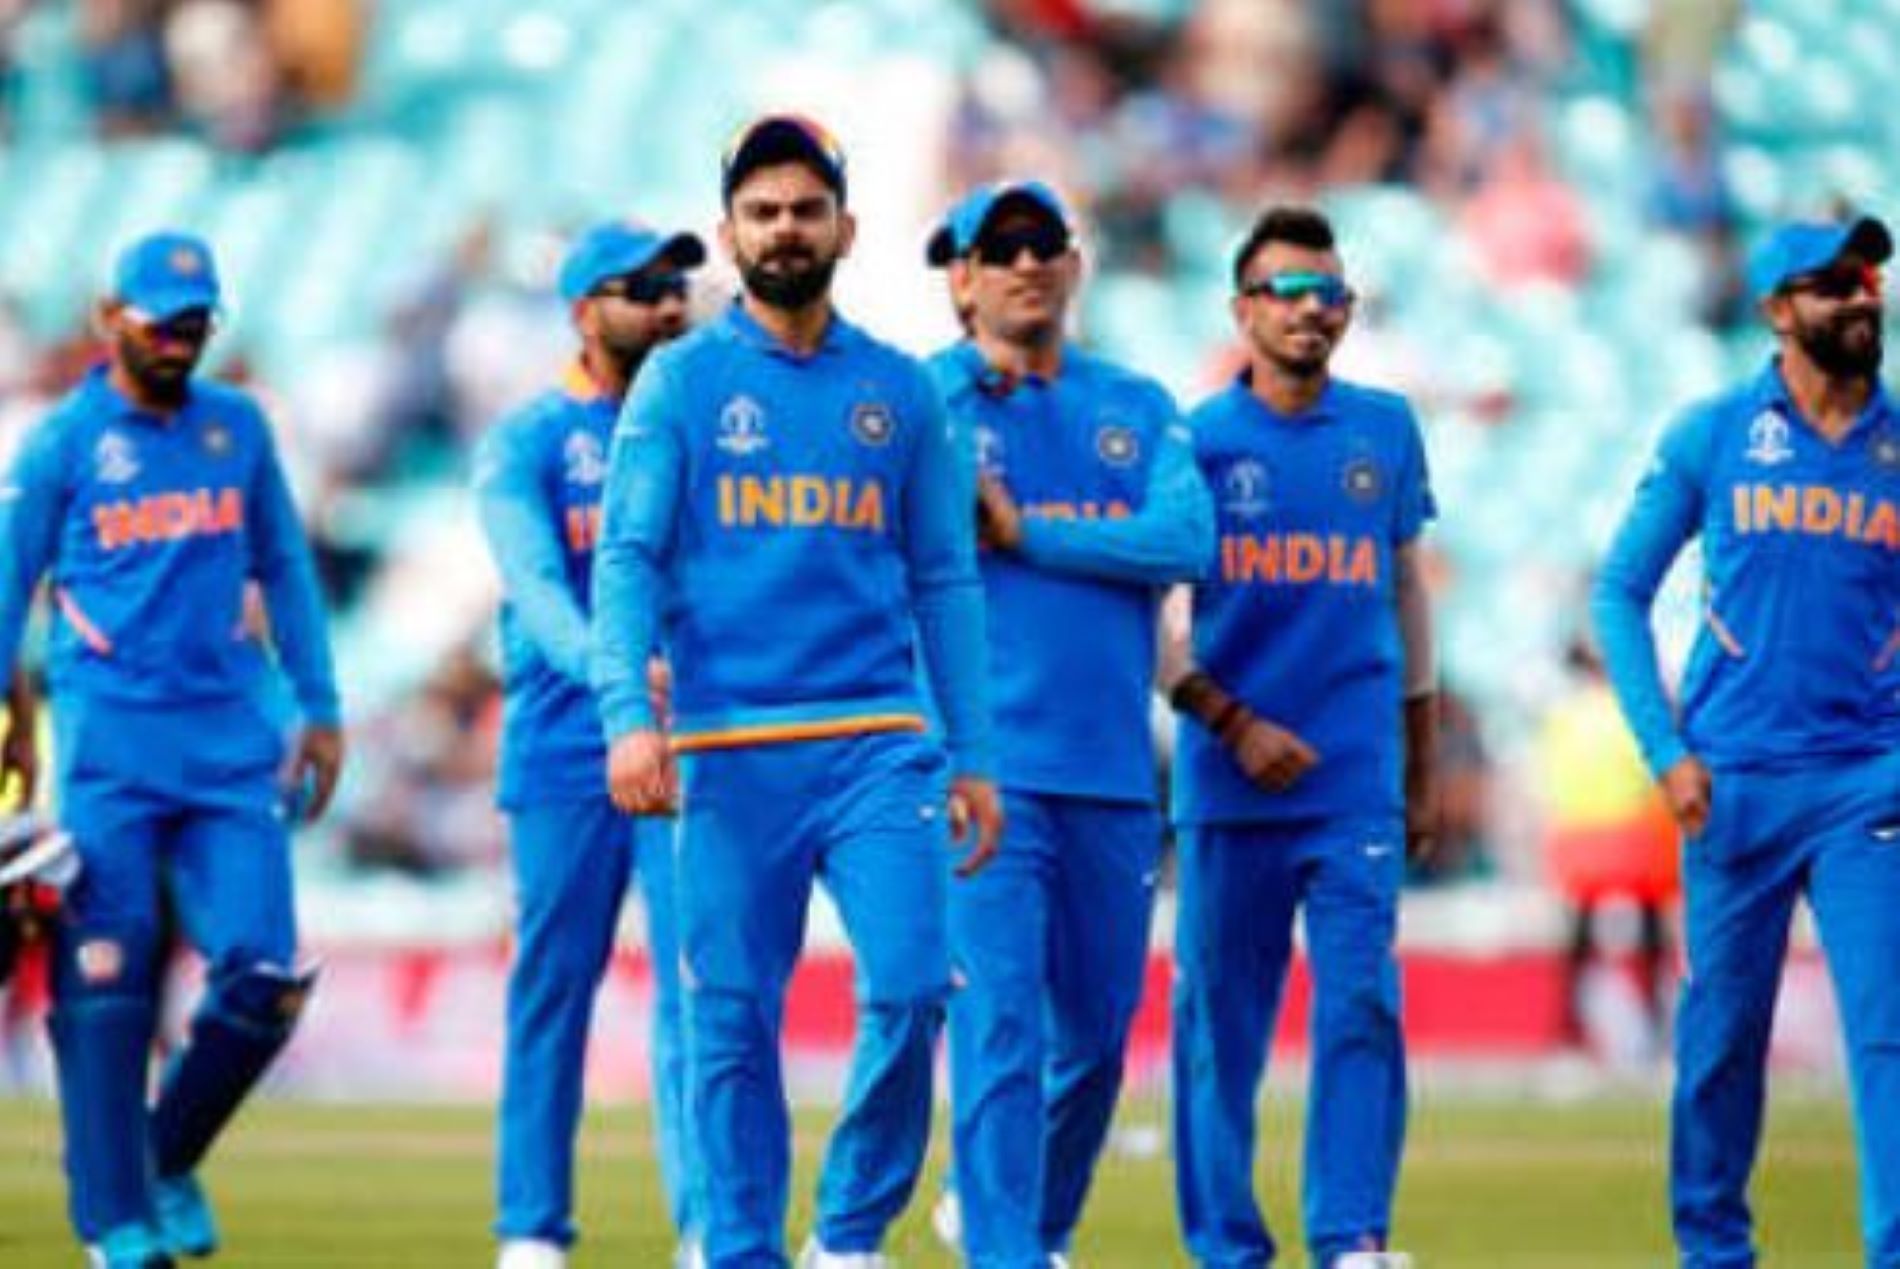 The 2019 World Cup semi-final defeat to New Zealand still stings Indian fans.